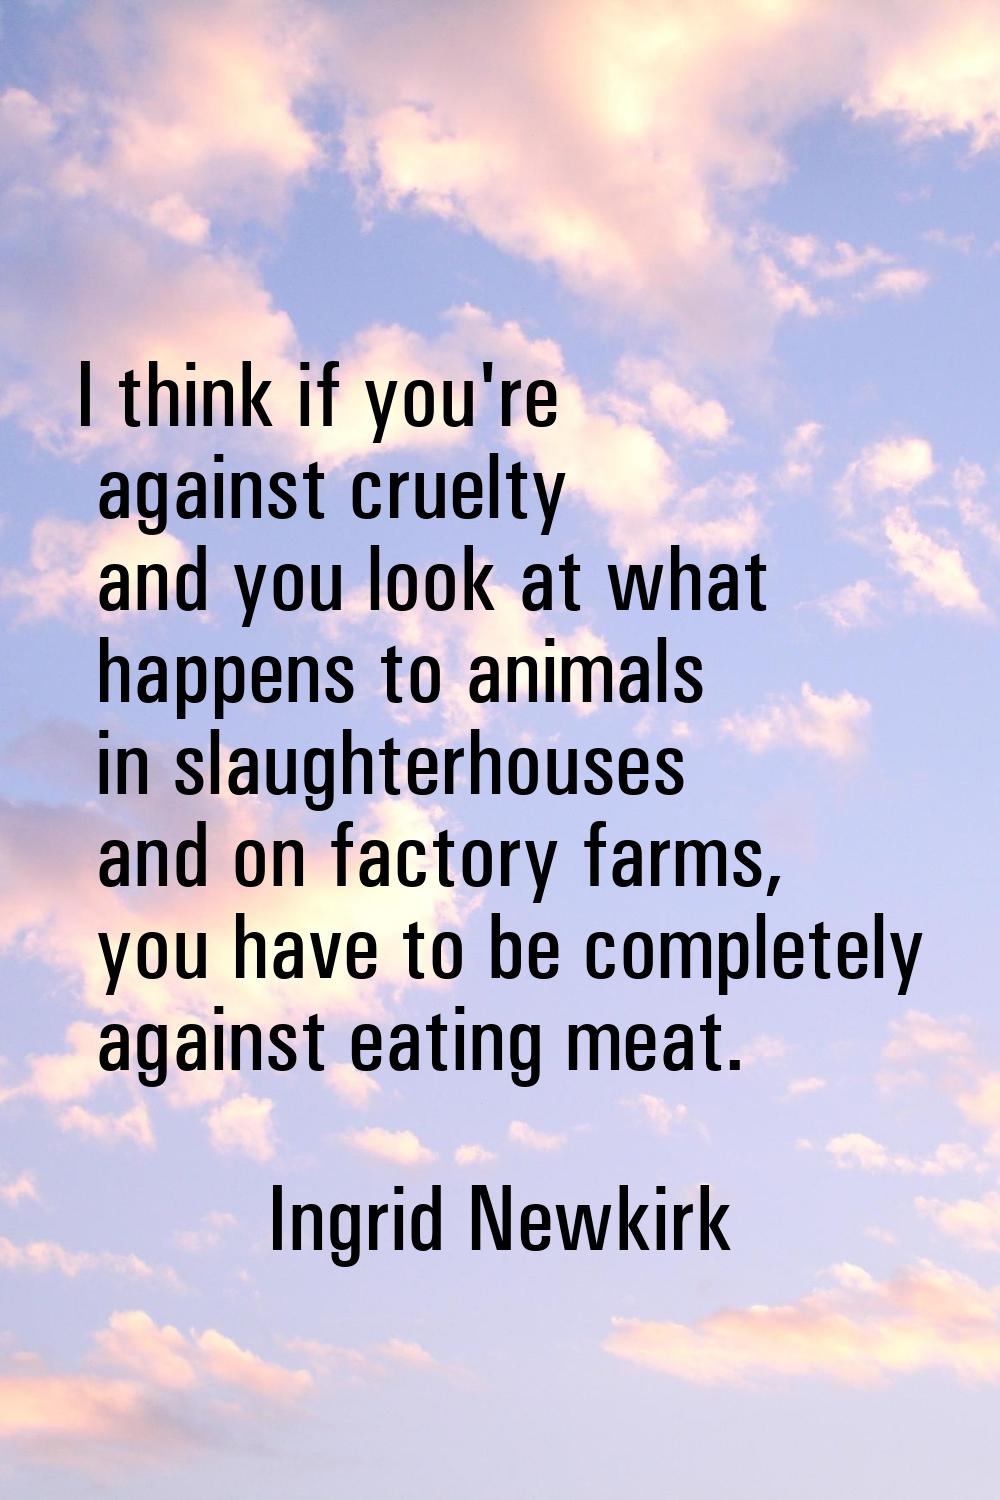 I think if you're against cruelty and you look at what happens to animals in slaughterhouses and on